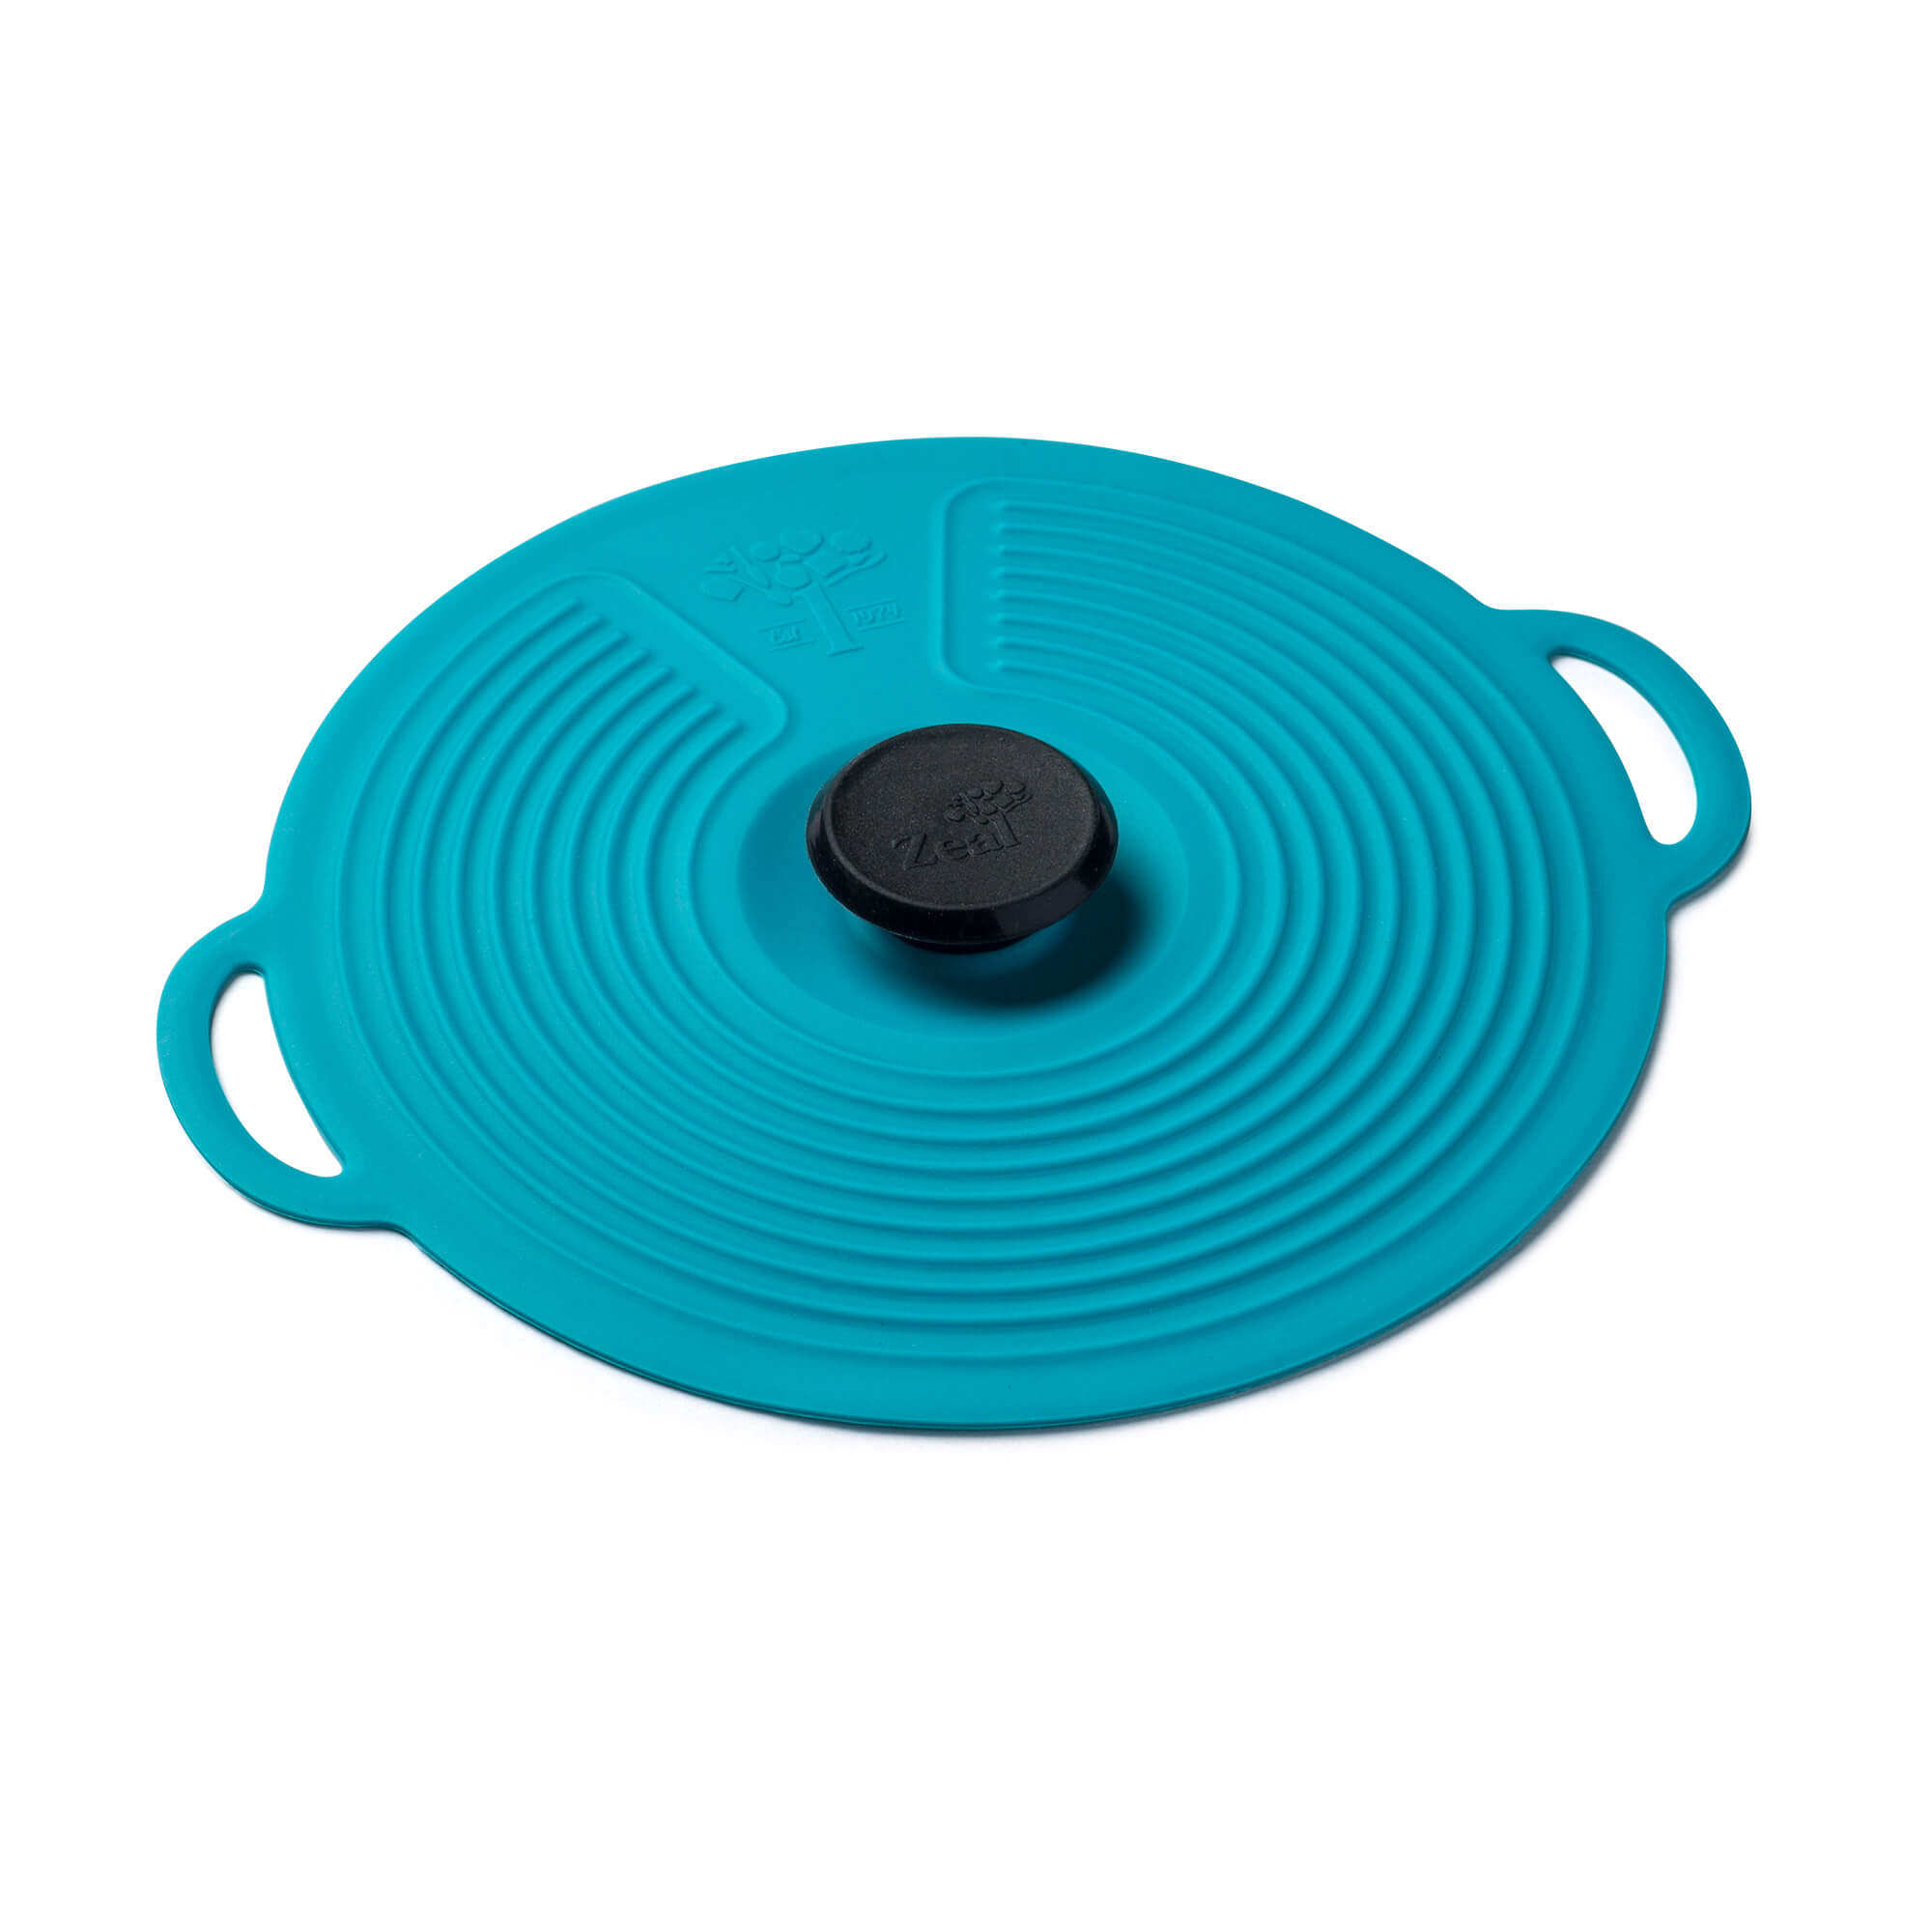 Small Aqua Silicone Self Sealing Lid by Zeal